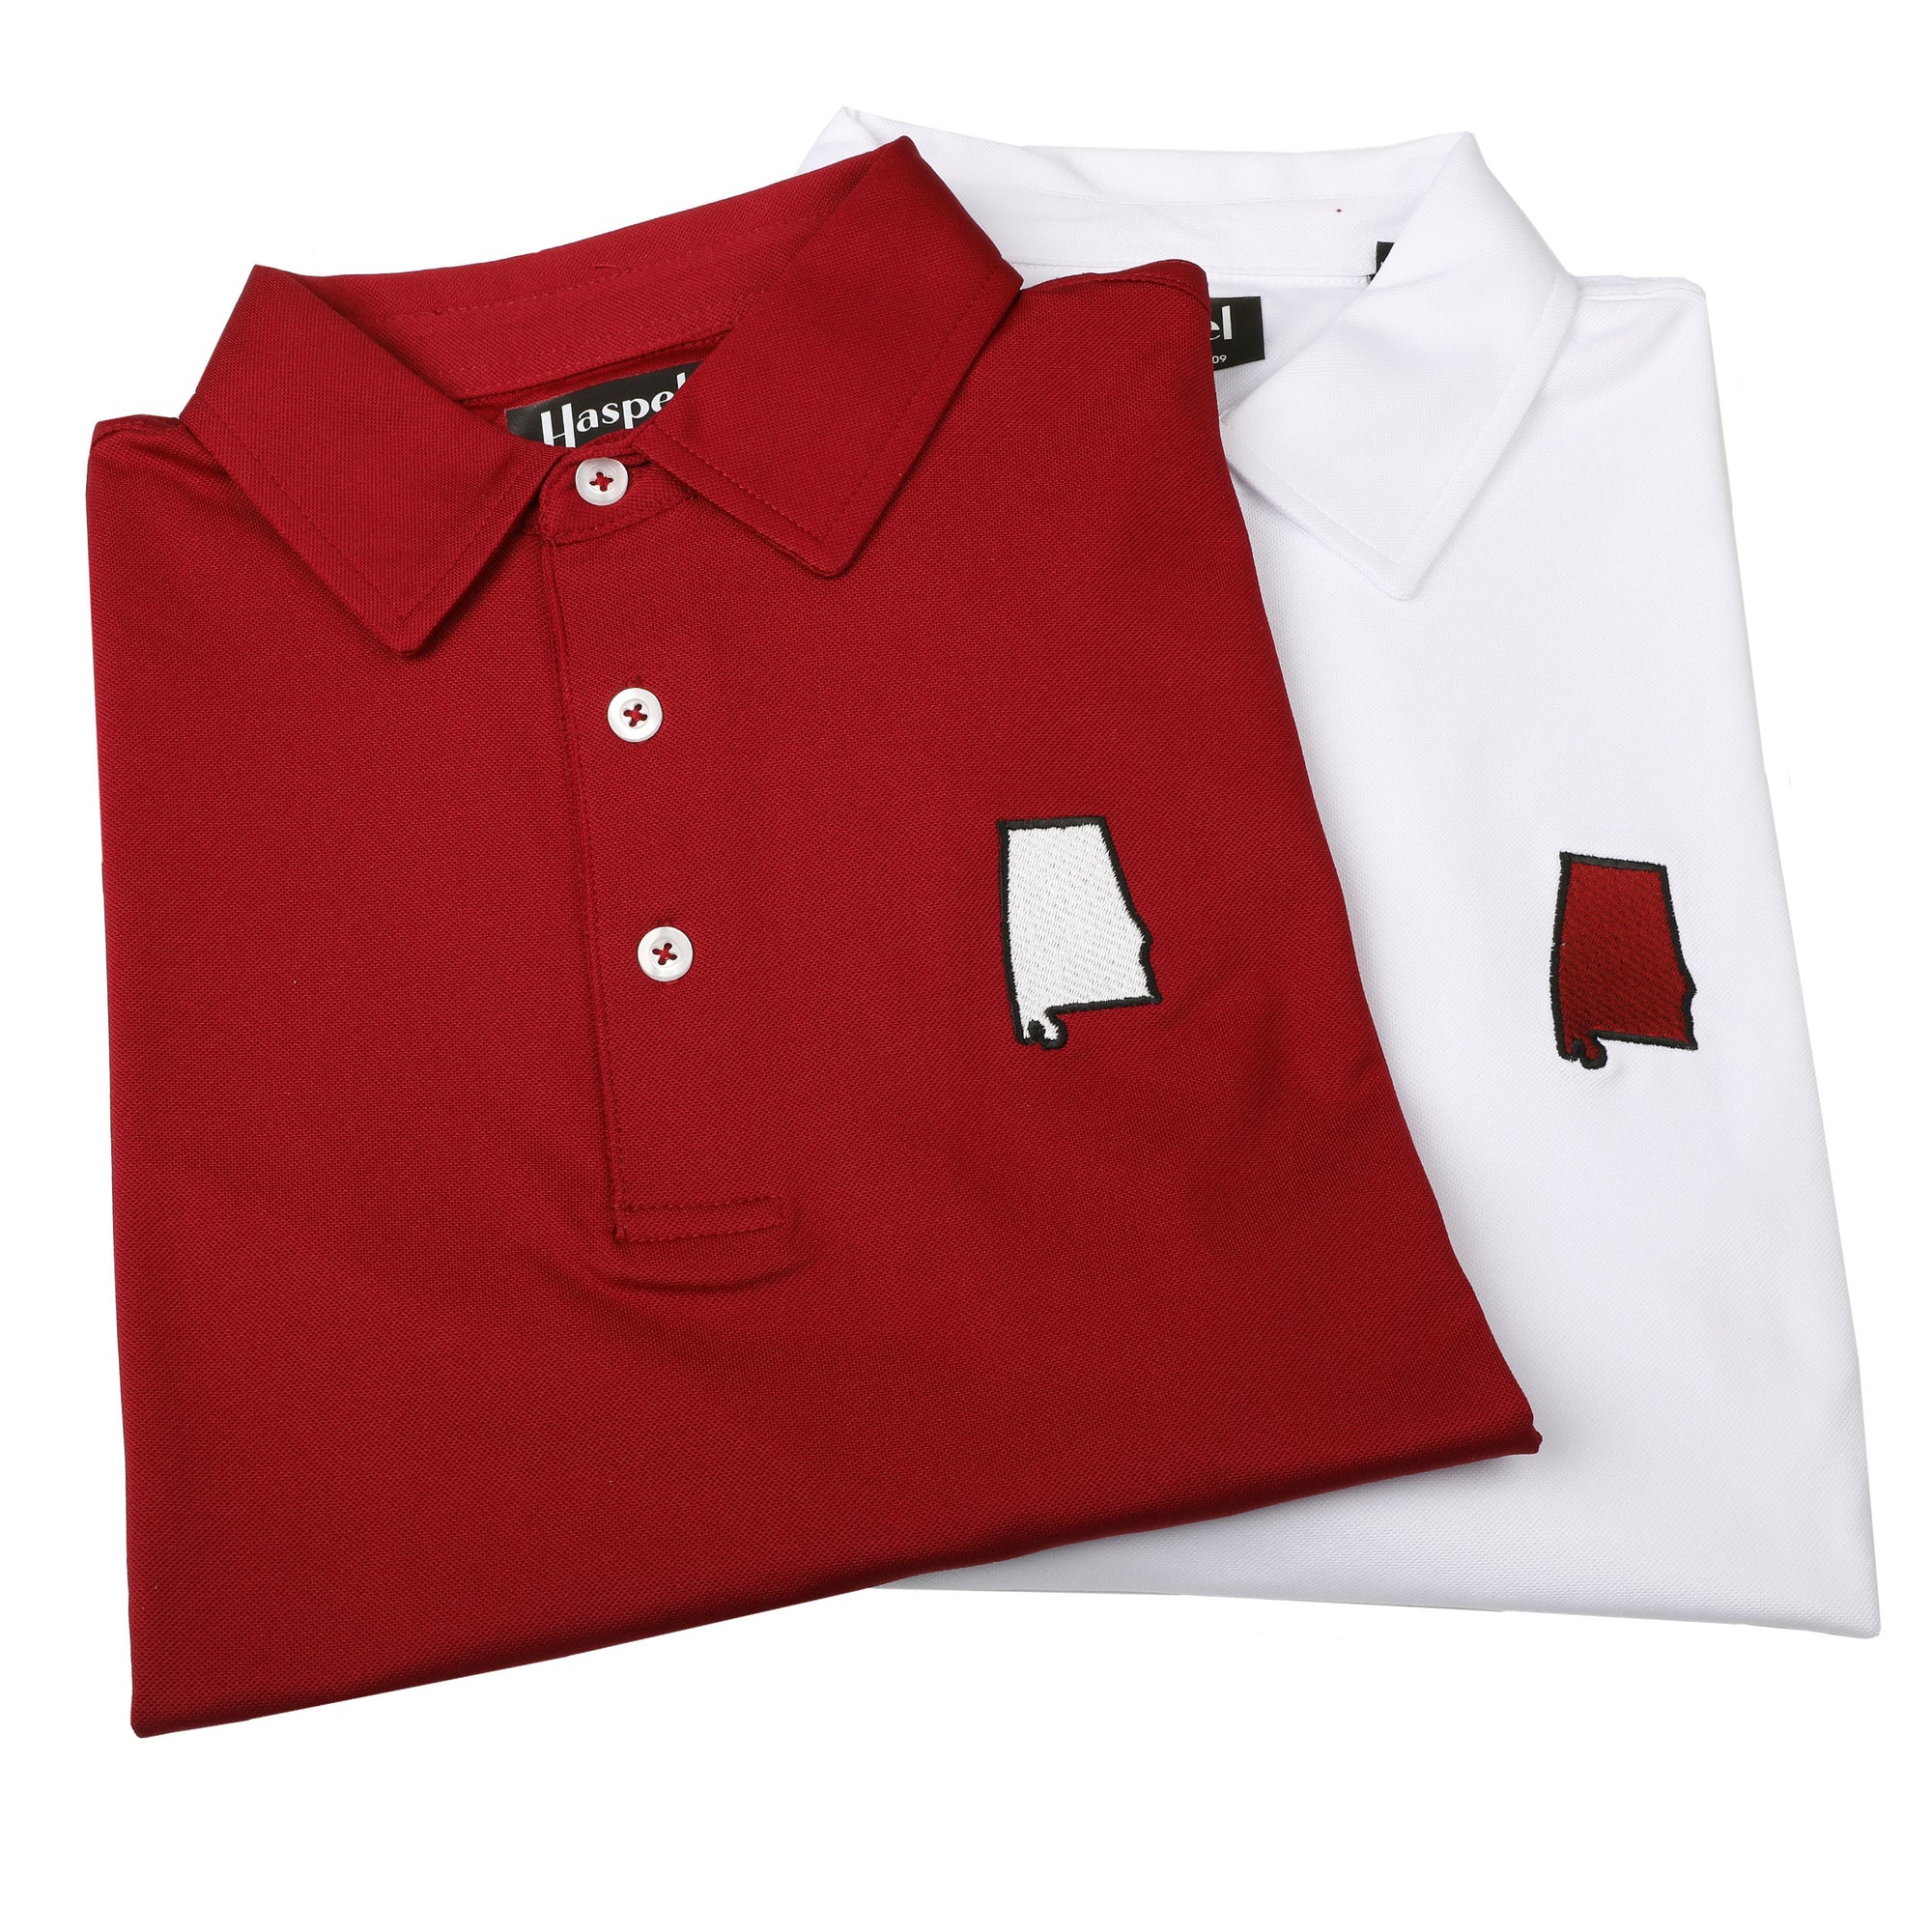 Call it red, burgundy, or crimson, whatever you like. A classic style, a bold color, all rolled into one for wherever the tides may take you. Available in Crimson or White. Coordinates with Game Day Belts, Ties, & Socks.  95% Cotton / 5% Spandex • 3 Button Placket • No Chest Pocket • Imported • Machine Wash • Return Policy